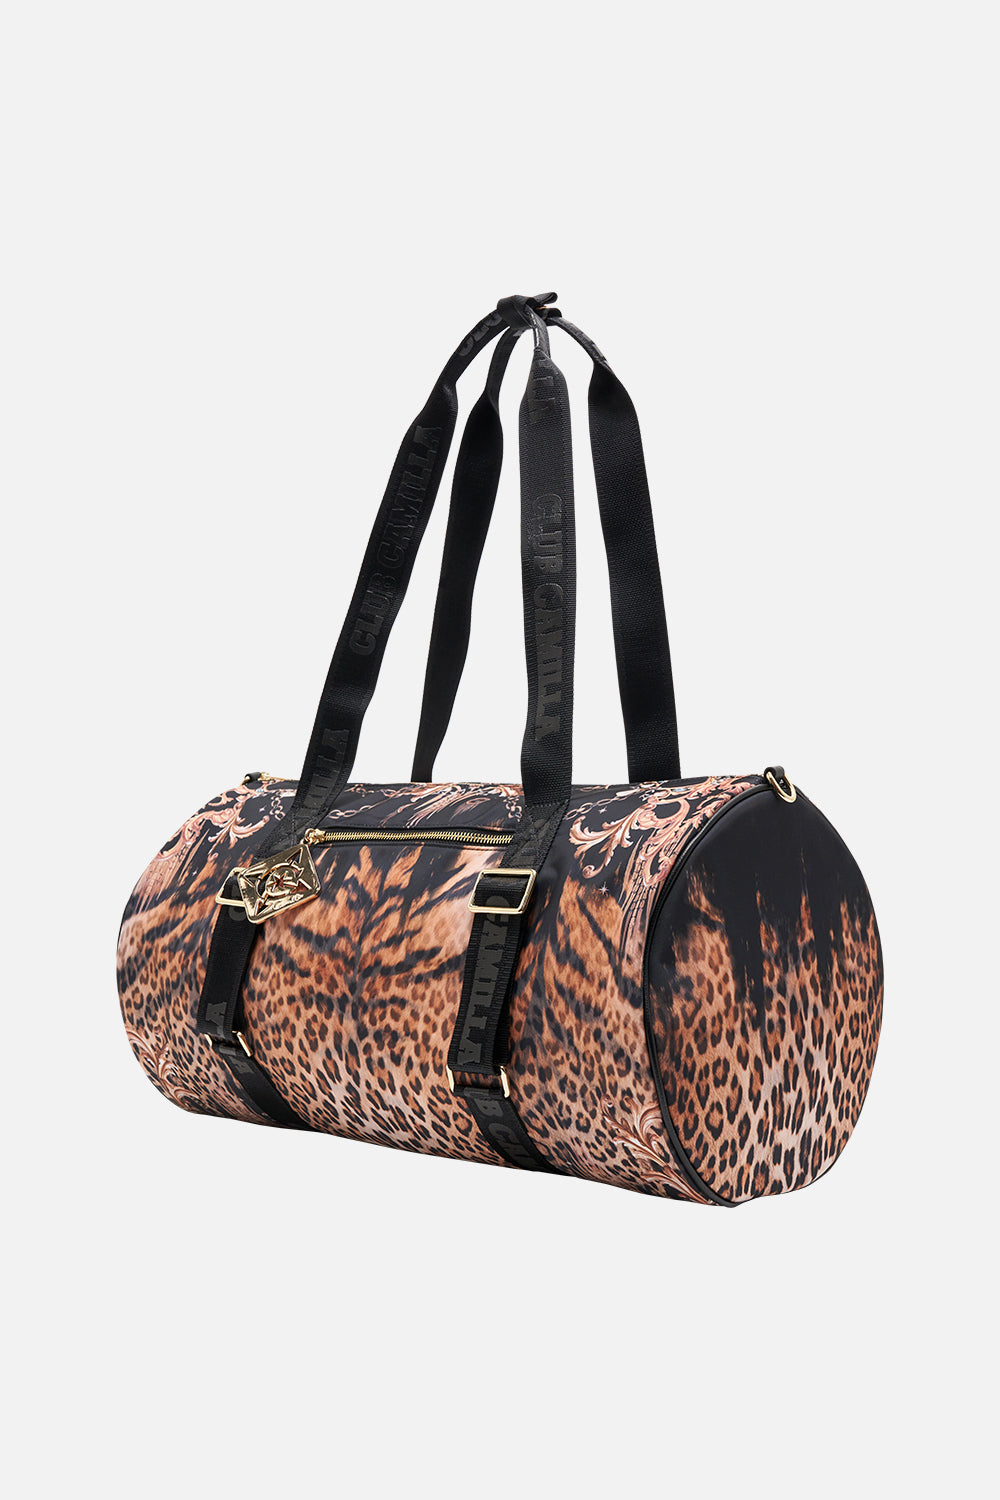 Side view of CAMILLA leopard print gym bag in Running in The Wild print